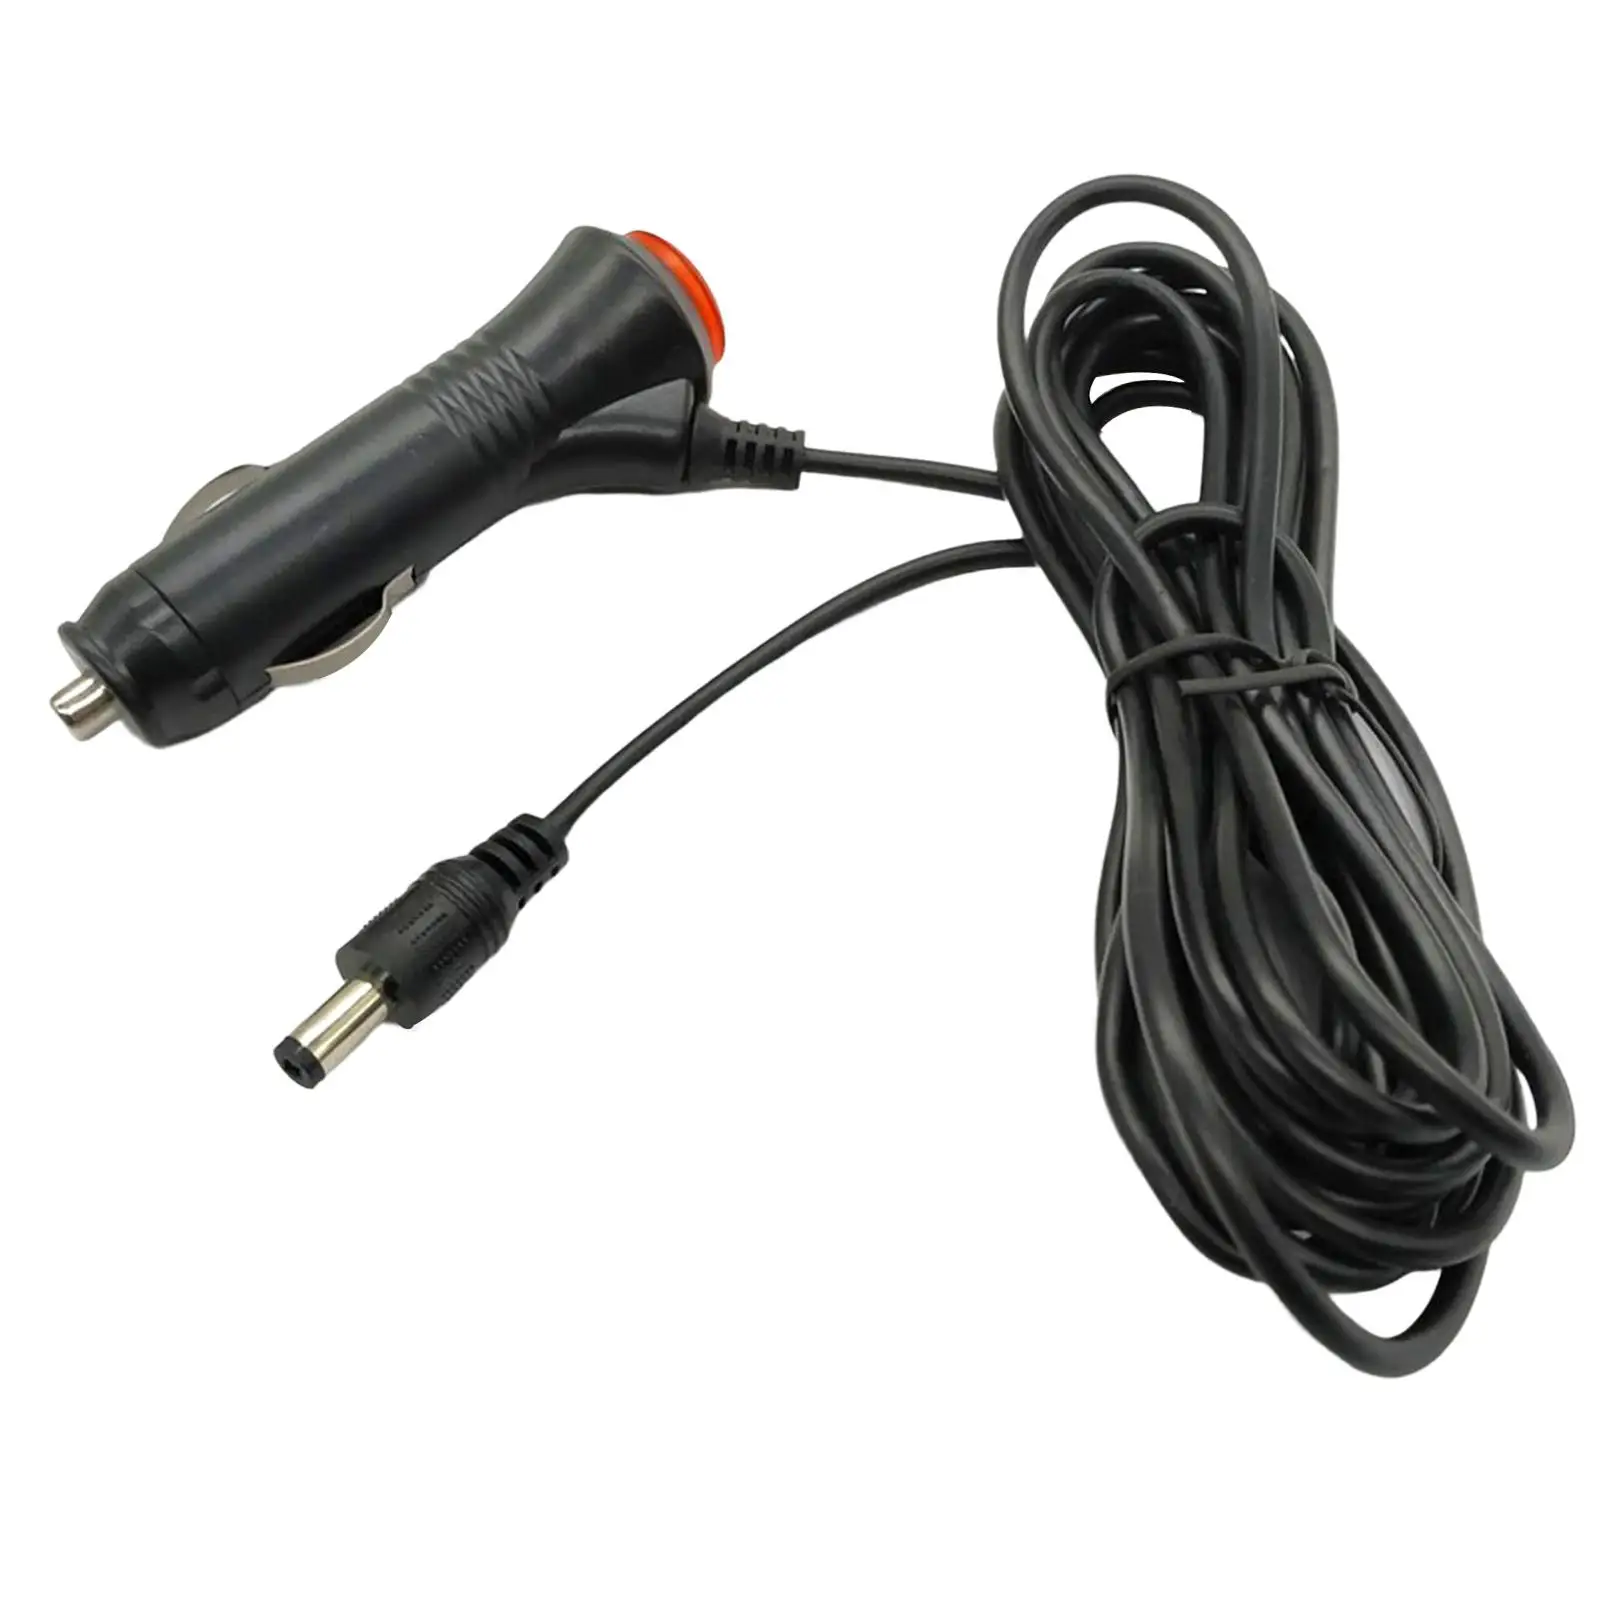 Vehicle Car Cigarette Lighter Charger Cord 5.5Mmx2.1mm Connector Power Supply Cable for DVD Player Camera